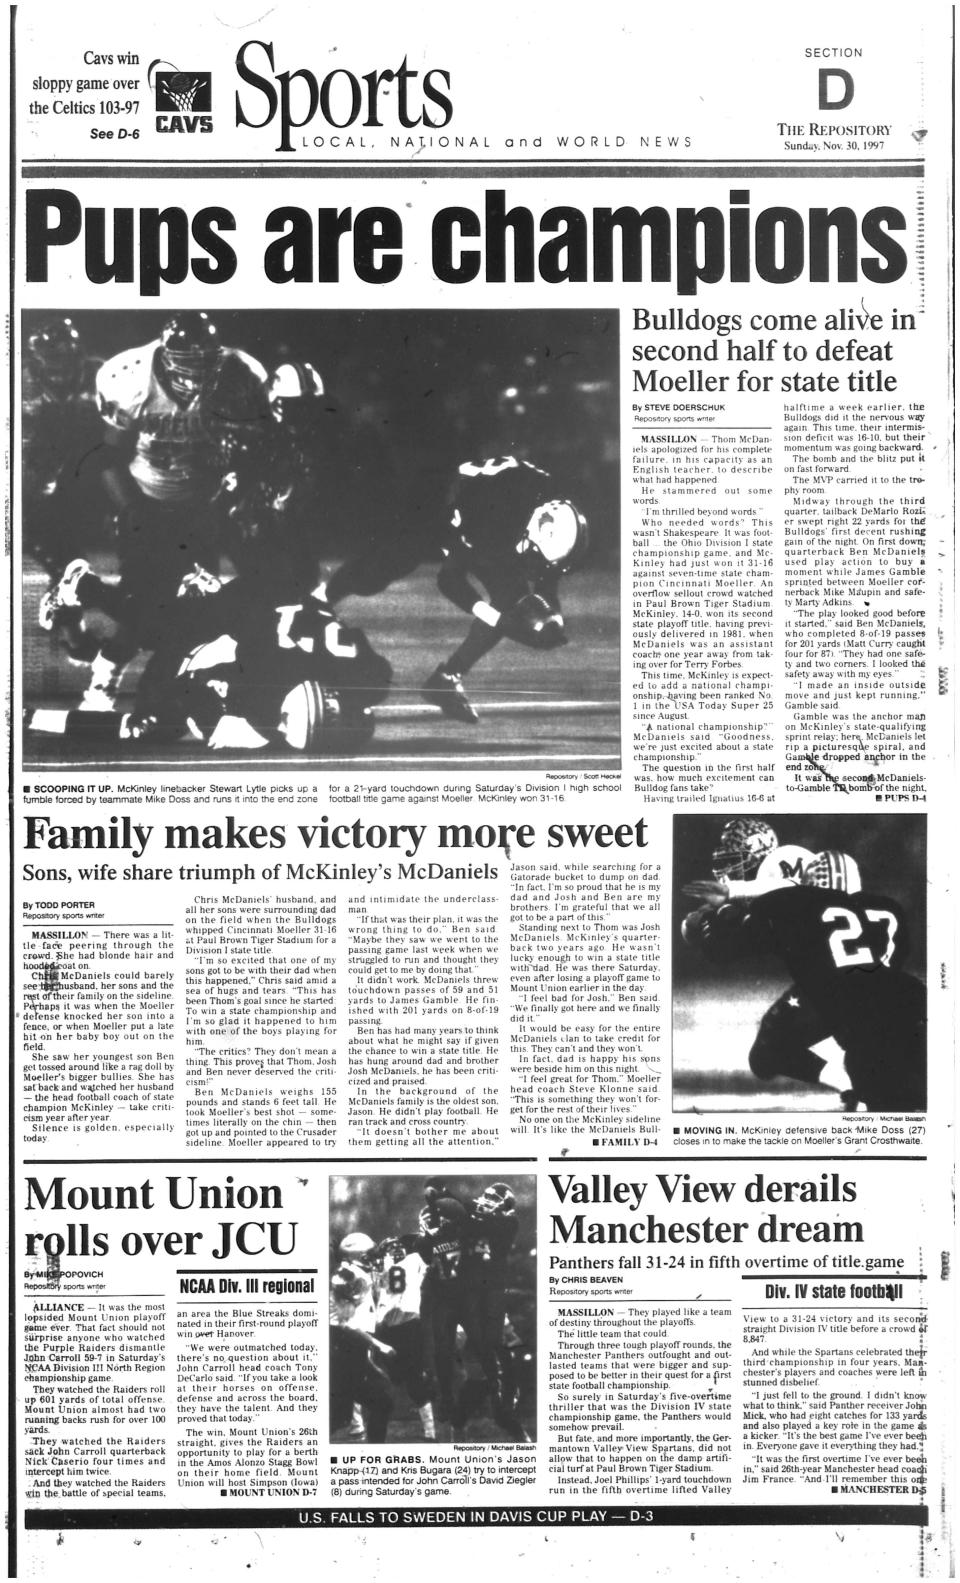 The front page of The Repository sports page following McKinley winning the 1997 OHSAA Division I state championship..